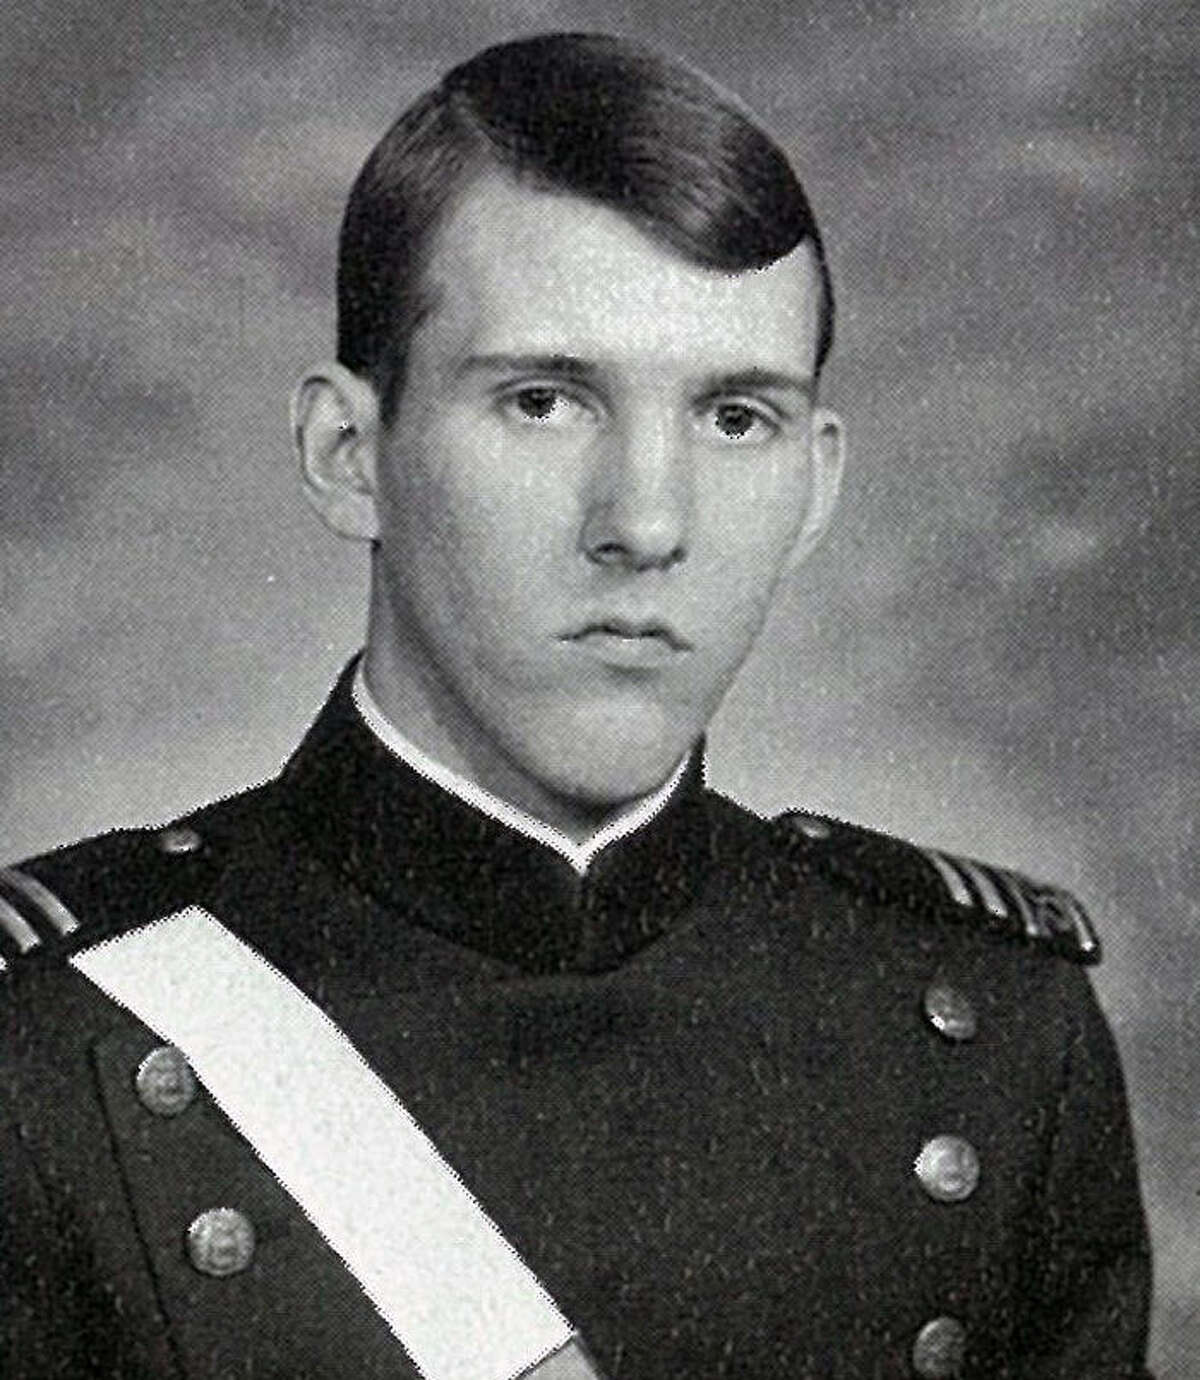 A formal portrait of Gregg Popovich from his Air Force Academy yearbook. He became an officer in 1970.